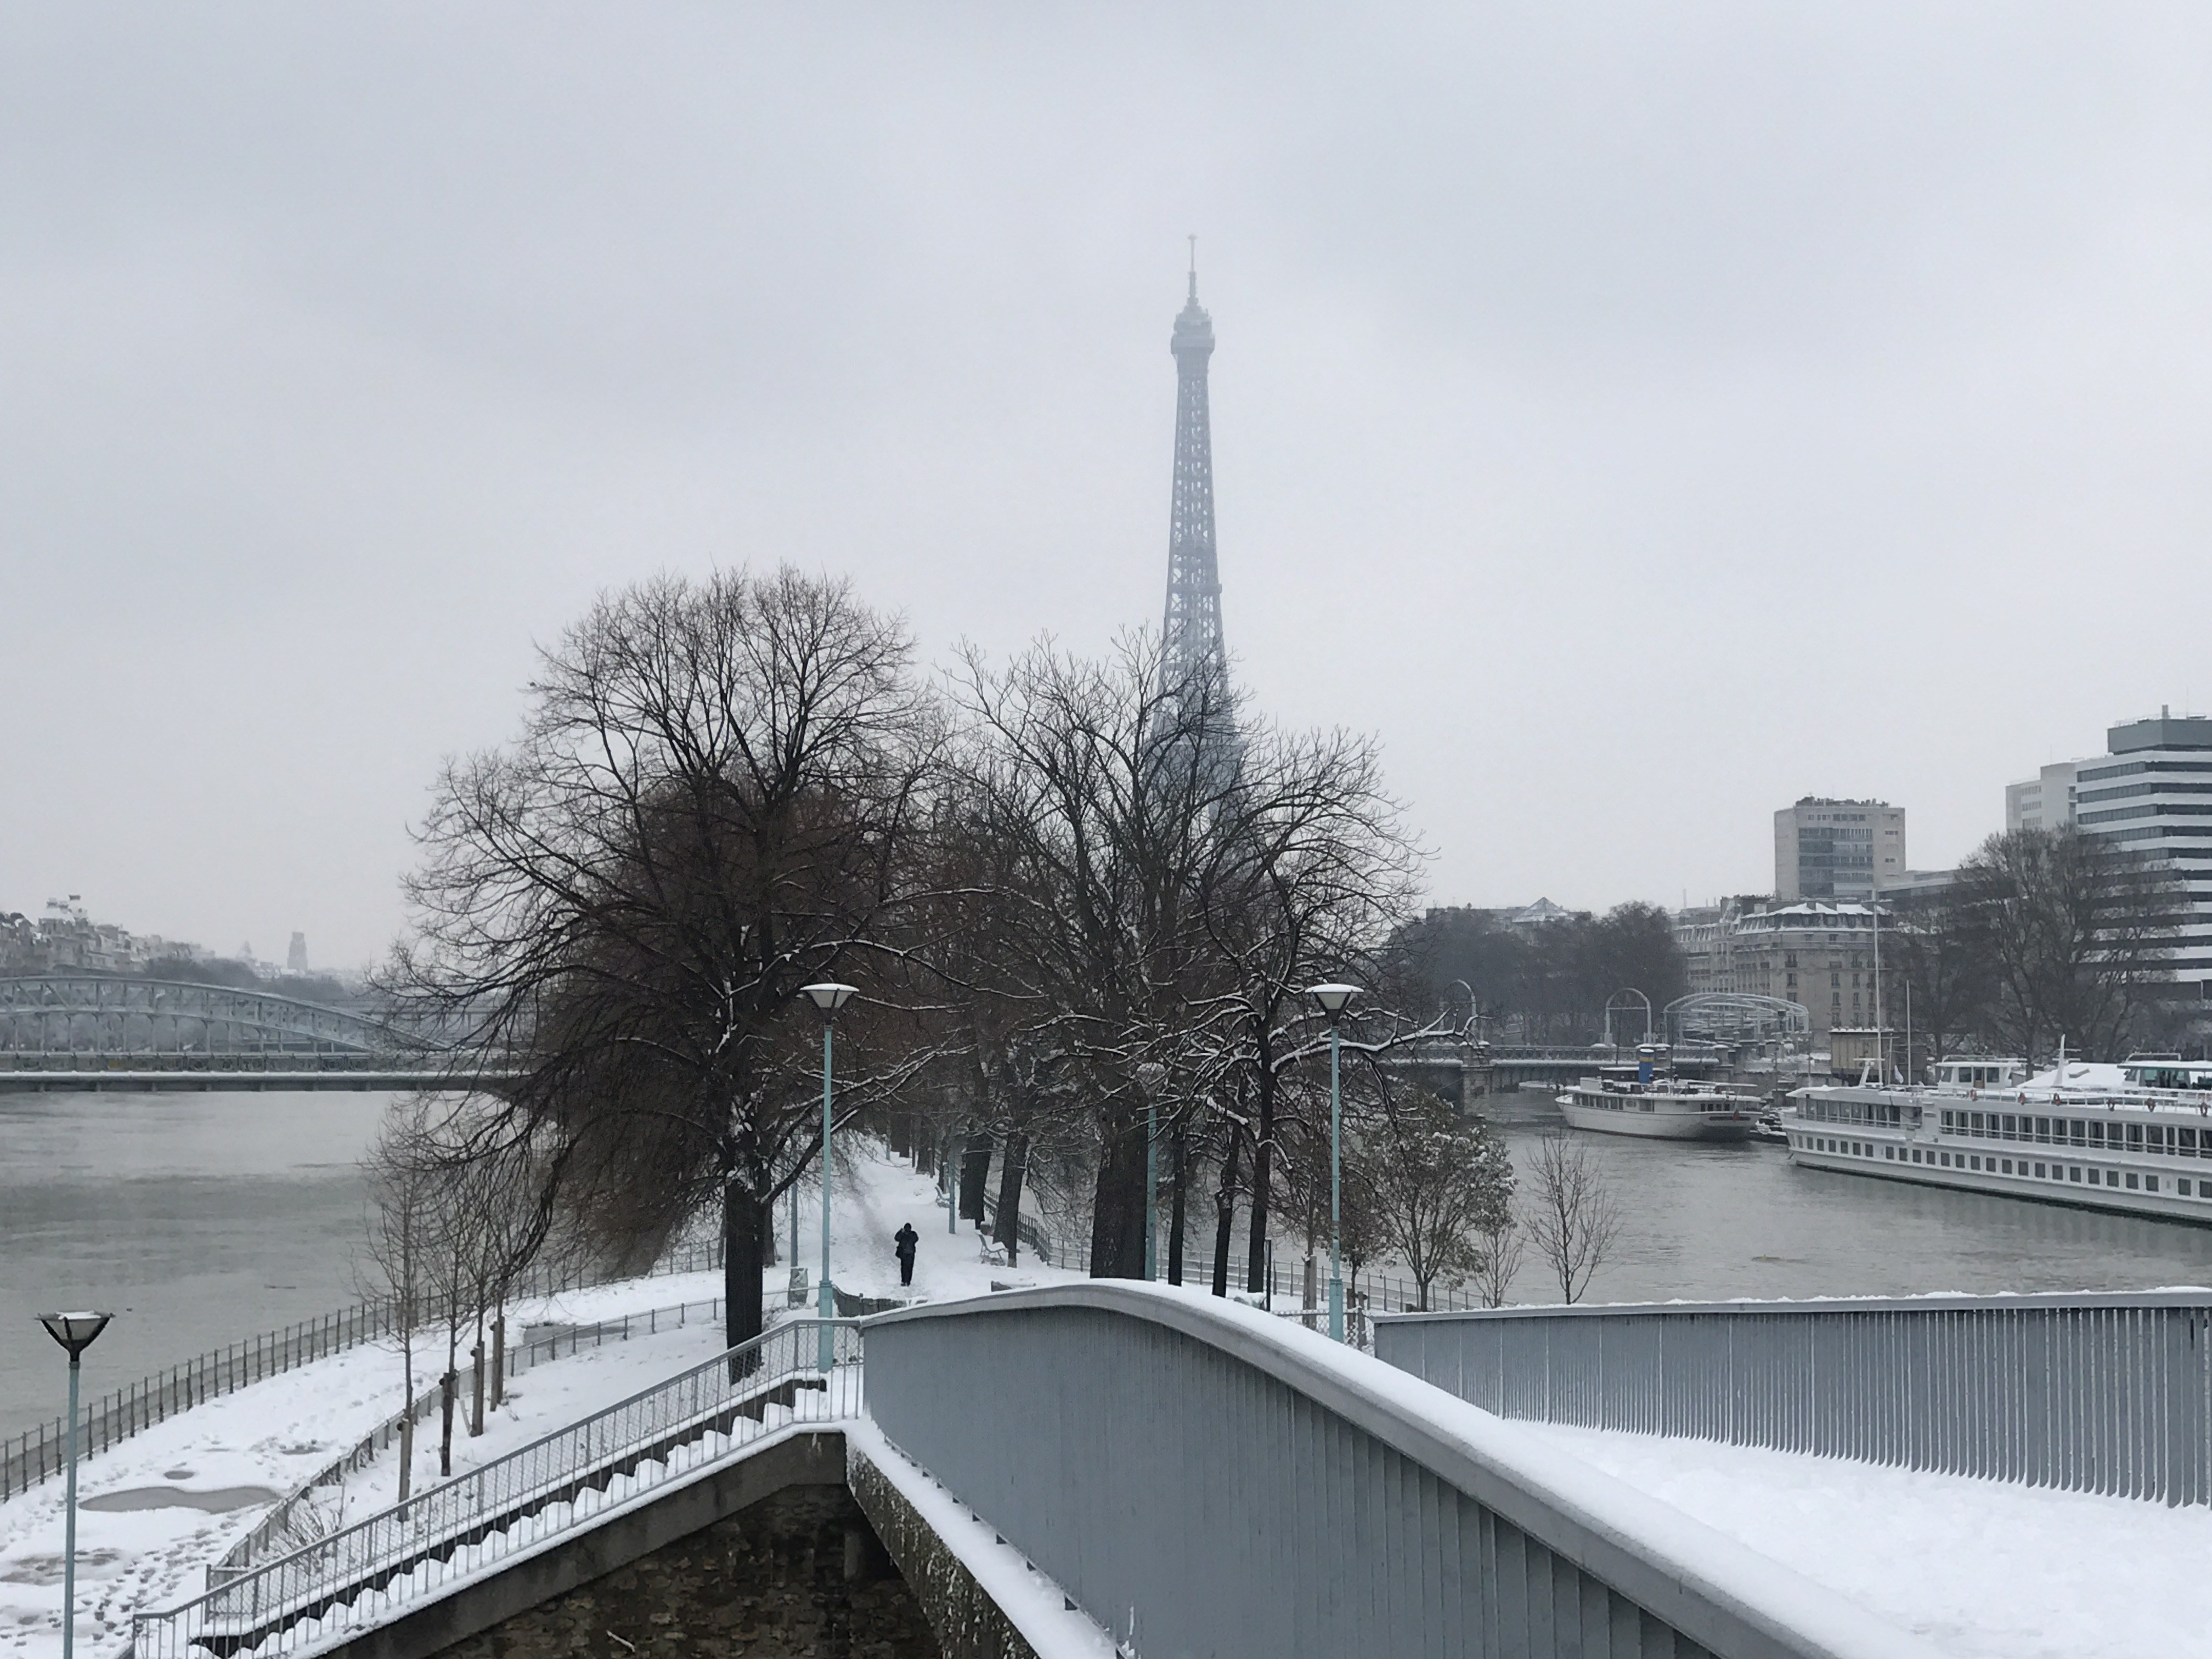 Winter Wonderland - A photo story of the snow in Paris